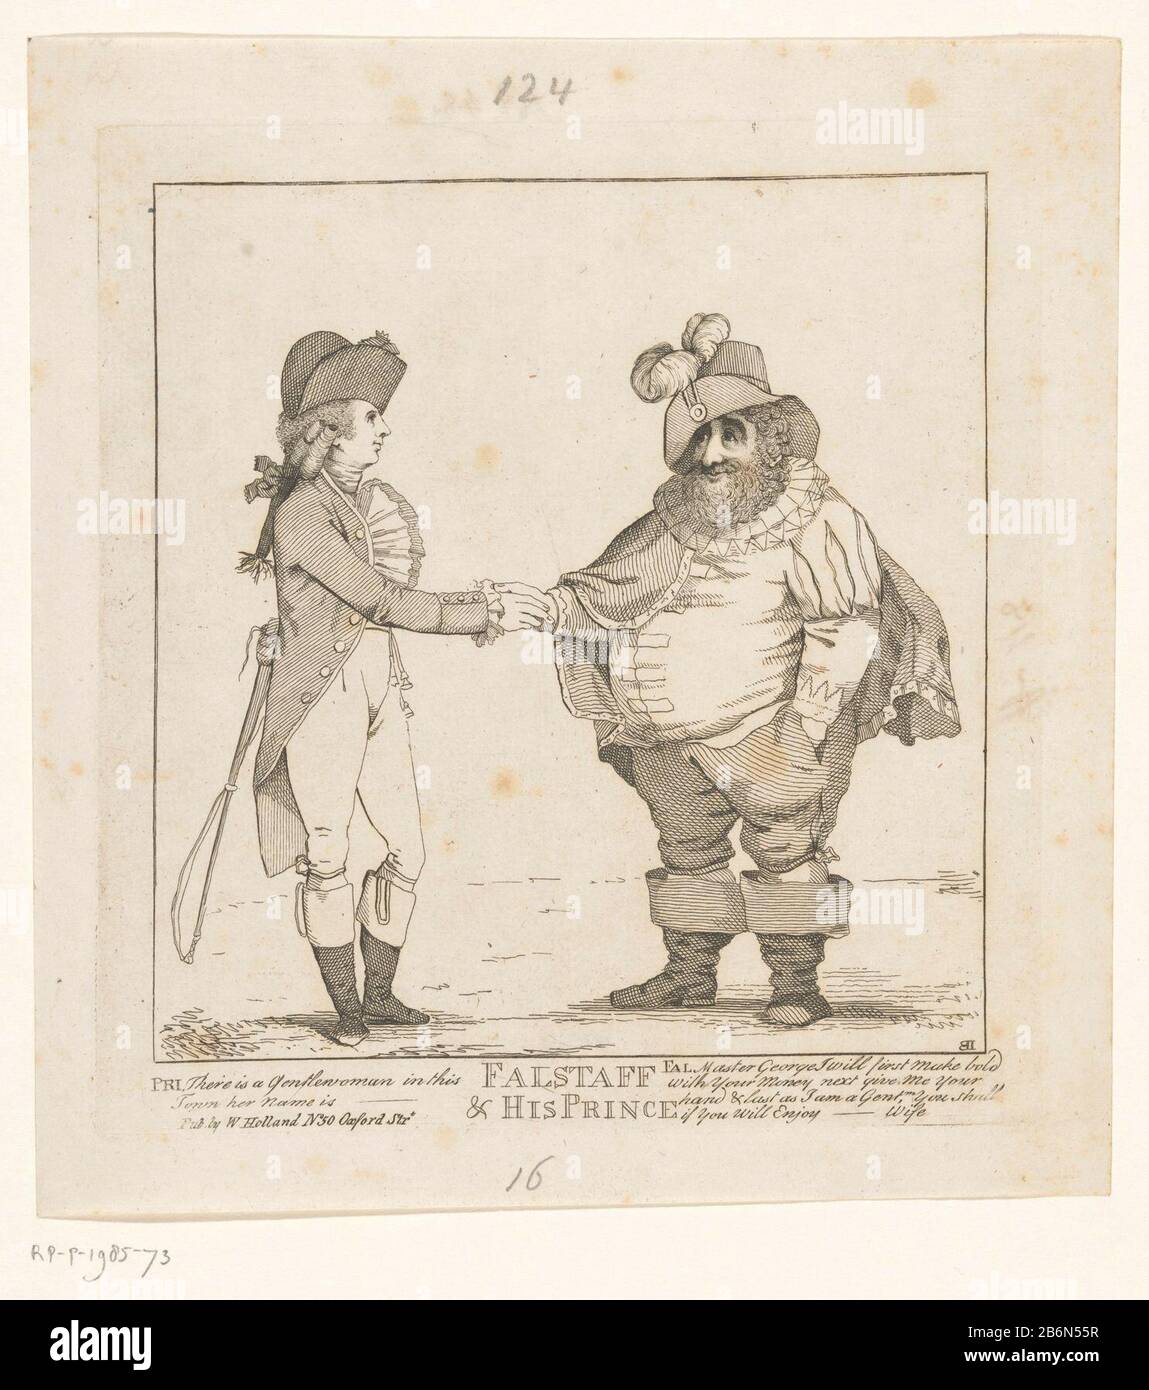 Fox en de Prins van Wales, 1783 Falstaff & his Prince (titel op object) Cartoon Charles Fox as Falstaff shaking the hand of the Prince of Wales, 1783. Manufacturer : printmaker John Boyne (listed building) Publisher: William Holland (listed property) Place manufacture: printmaker: England Publisher: London Dating: 1783 Physical features: etching material: paper Technique: etching dimensions: plate edge: h 210 mm × W 195 mm Subject: group of actors, troupe; actors on the stageFalstaffWie George IV (King of the United Kingdom) and Charles James Fox Stock Photo